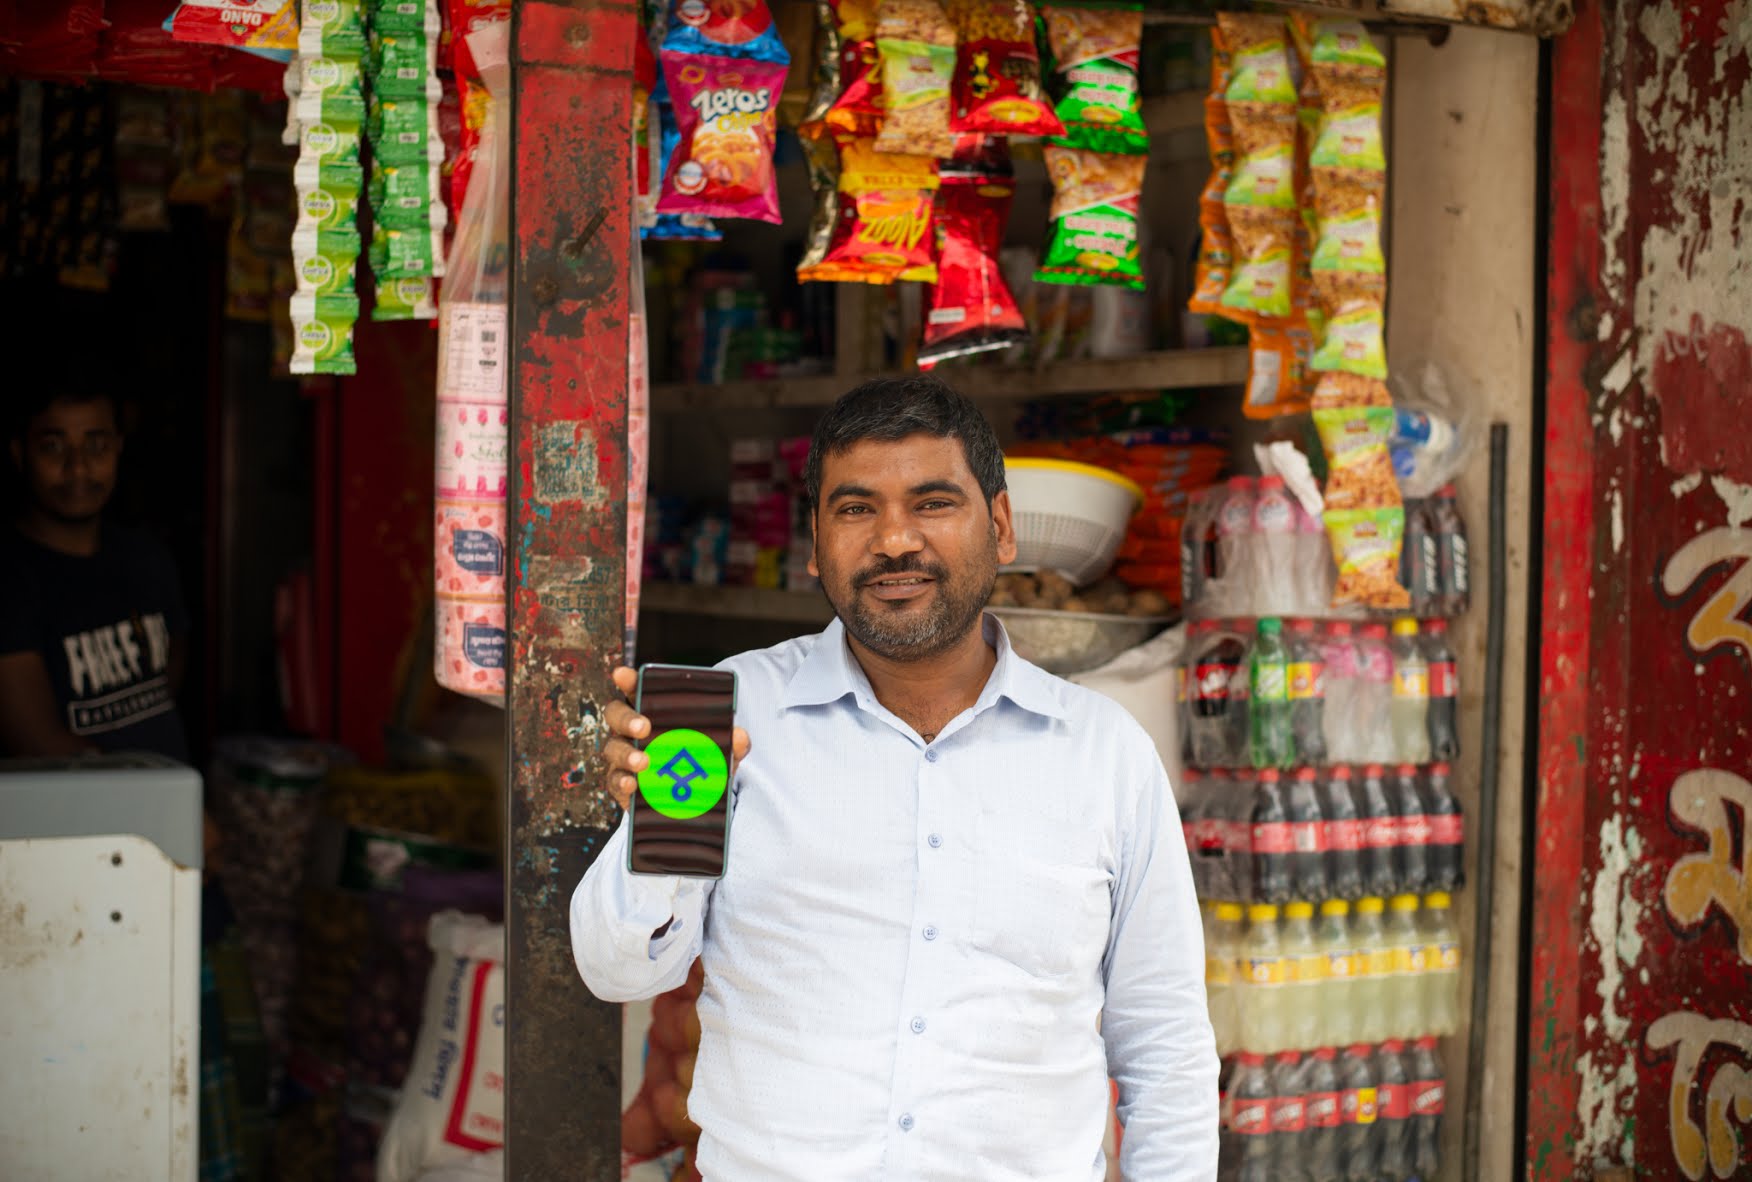 With a phone in his hand, a man is standing in front of a Bangladeshi grocery store. Promoting ShopUp.